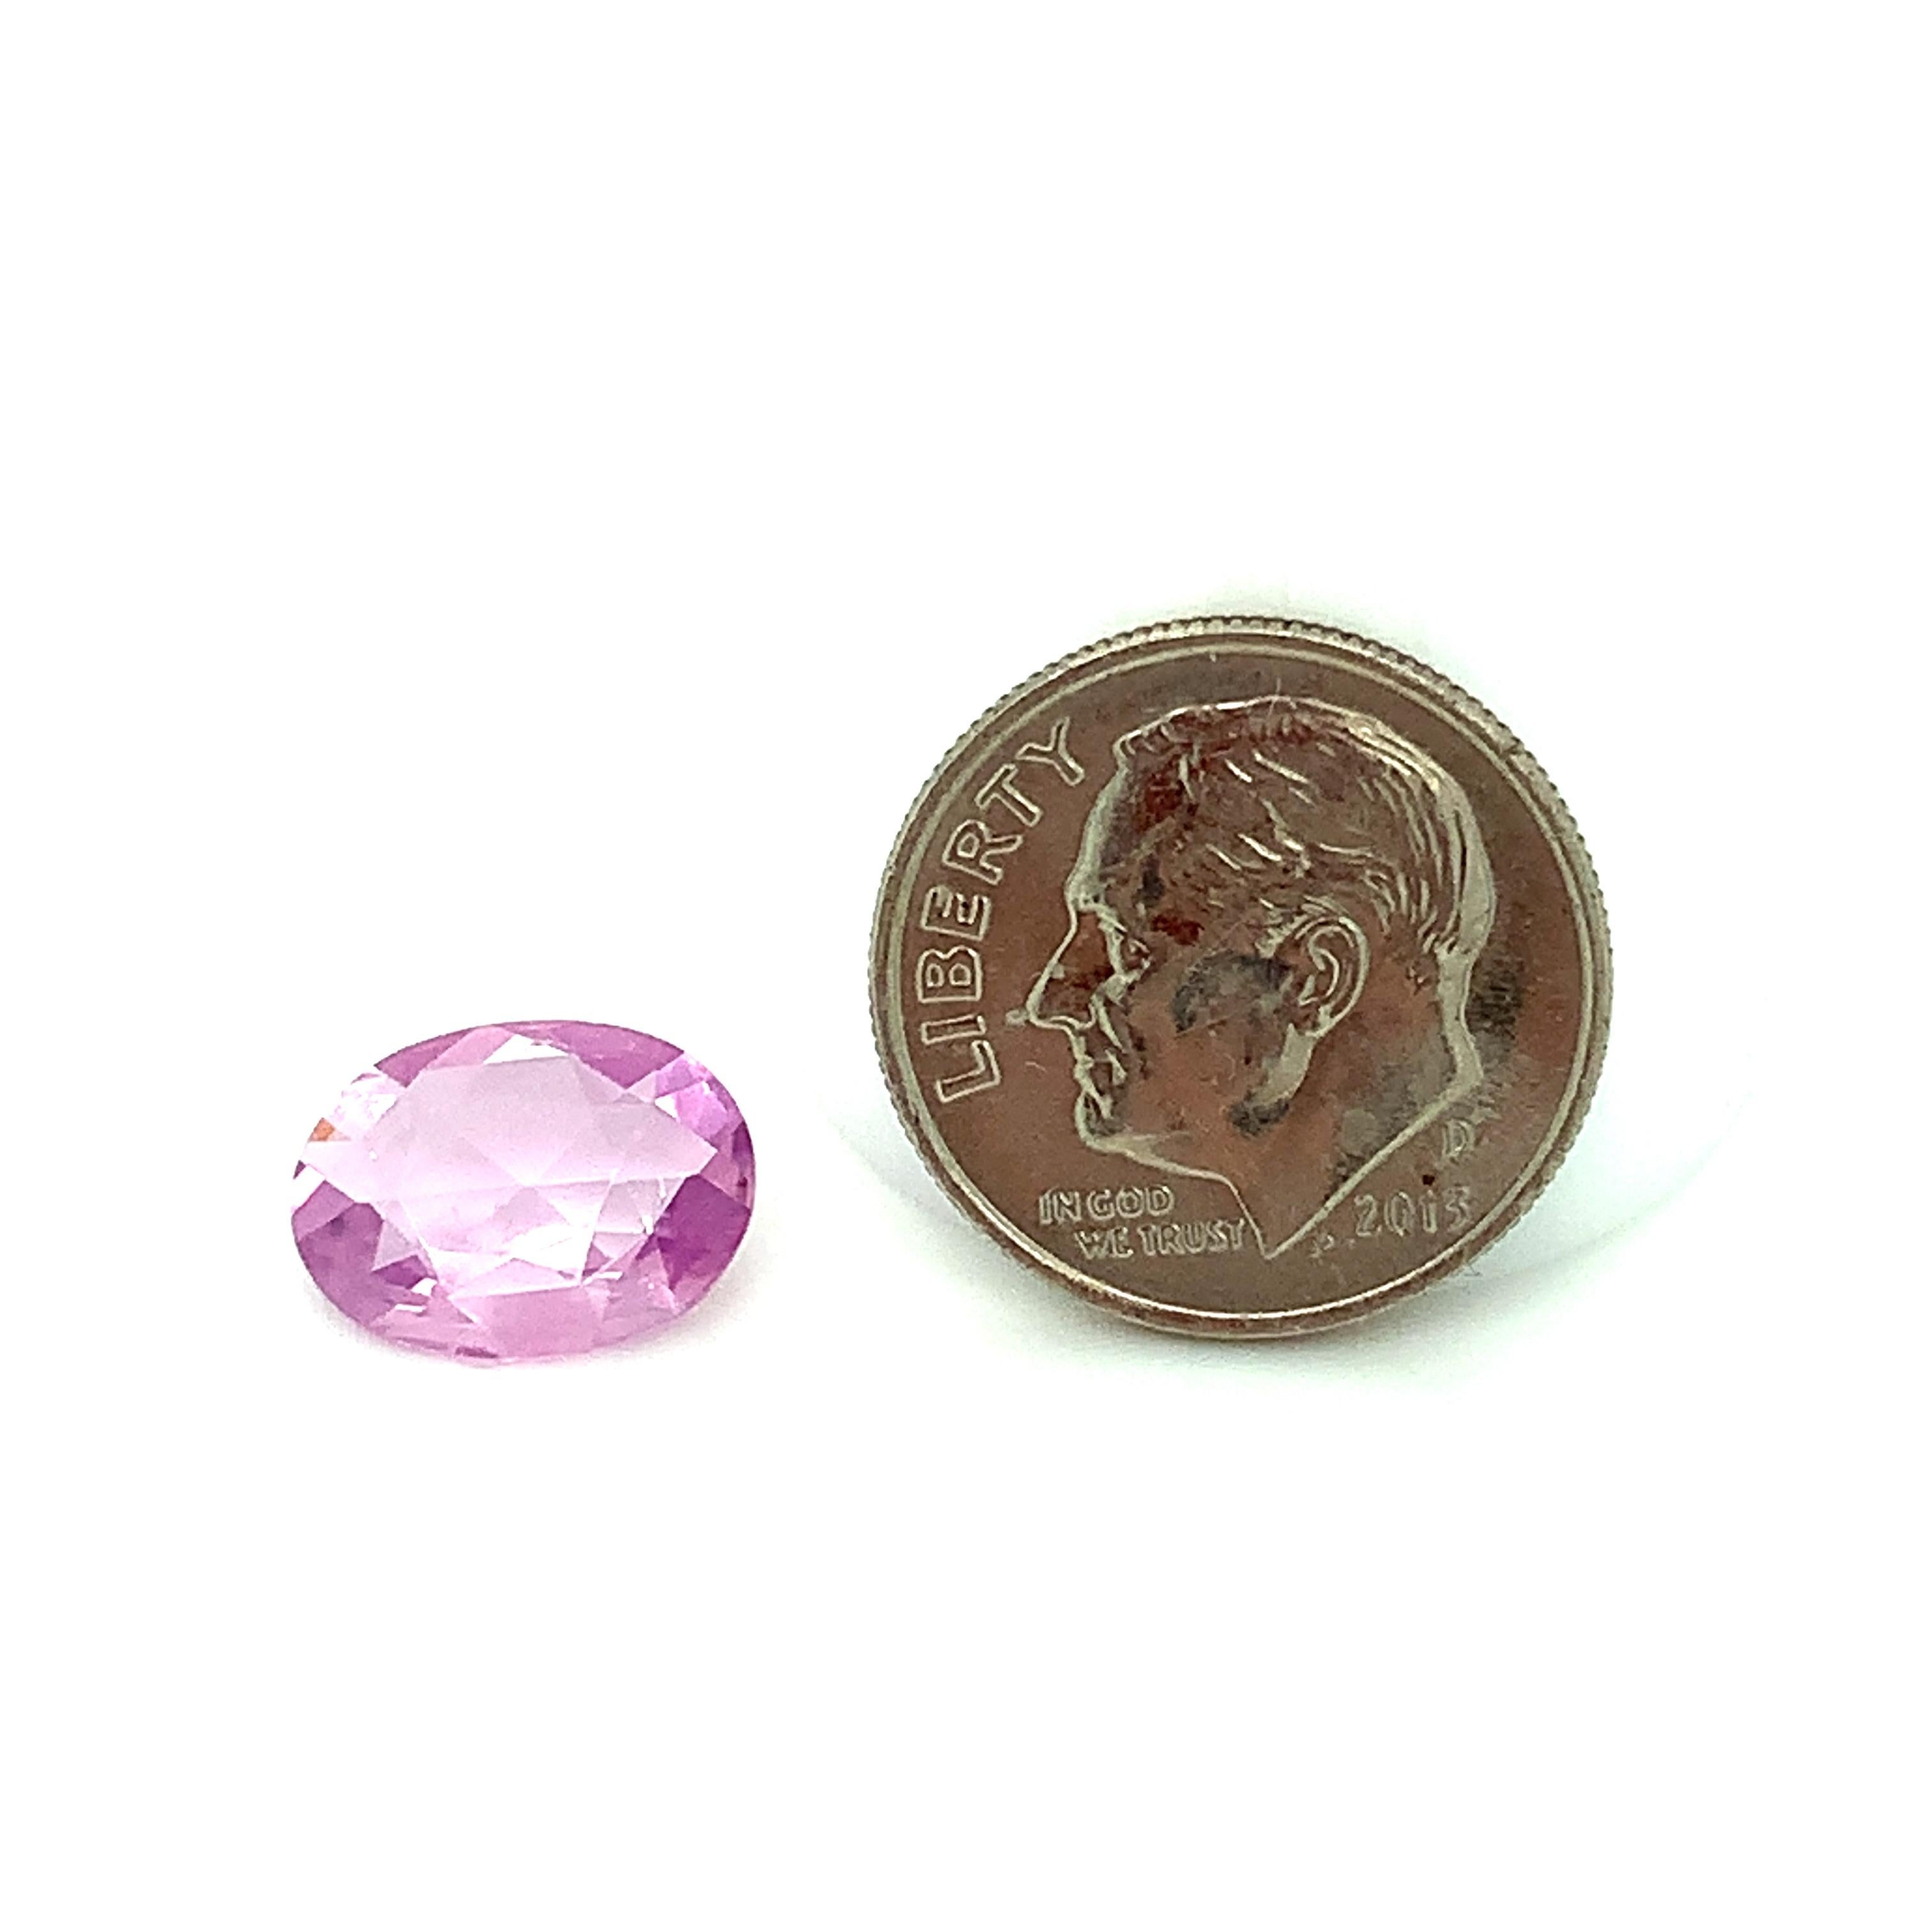 2.95 Ct. Pink Sapphire Oval GIA, Unset 3-Stone Engagement Ring or Pendant Gem 2